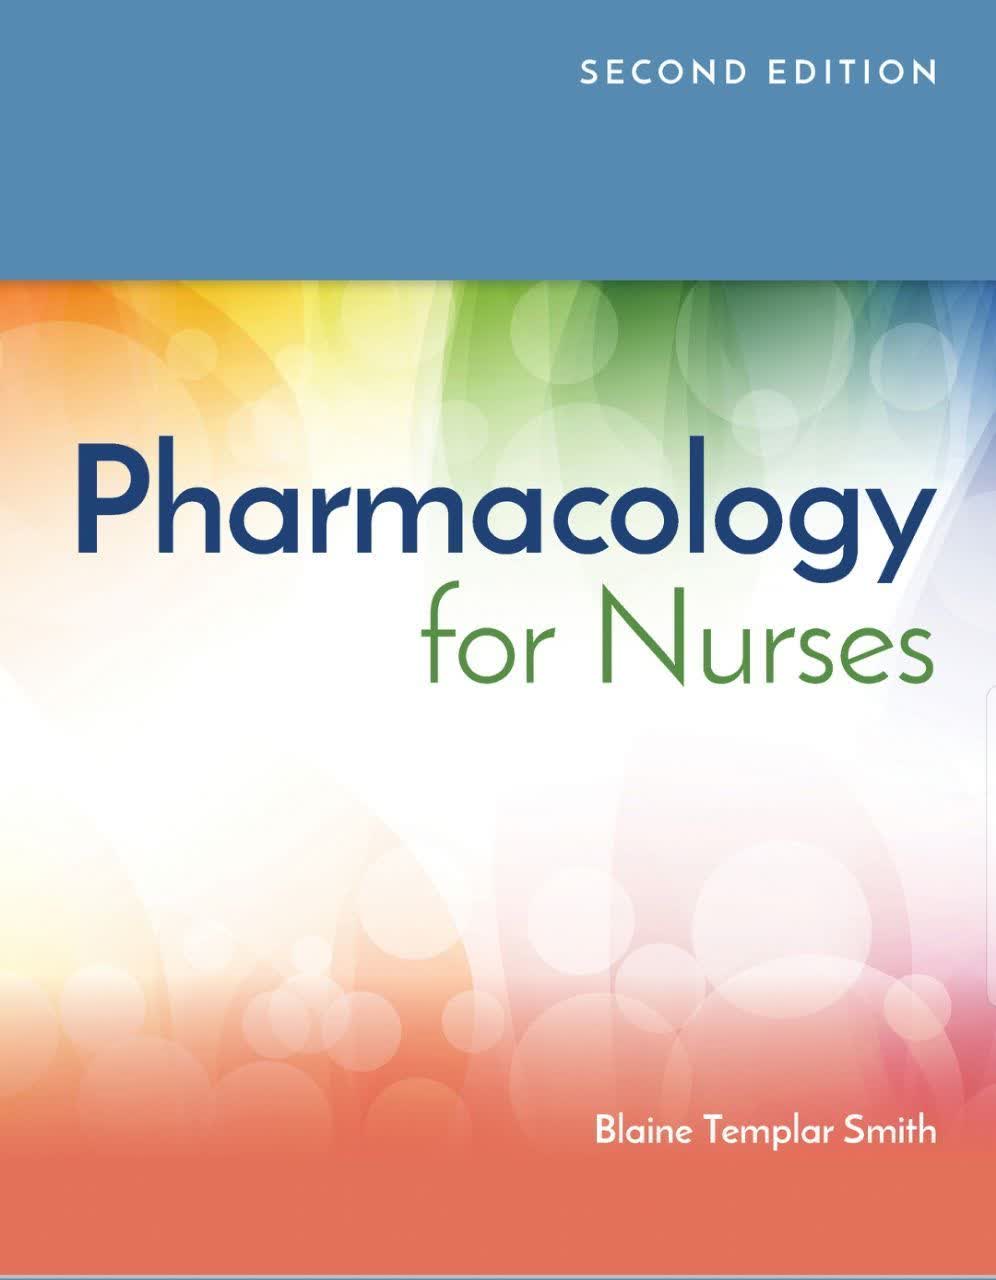 Pharmacology for nurses Second edition